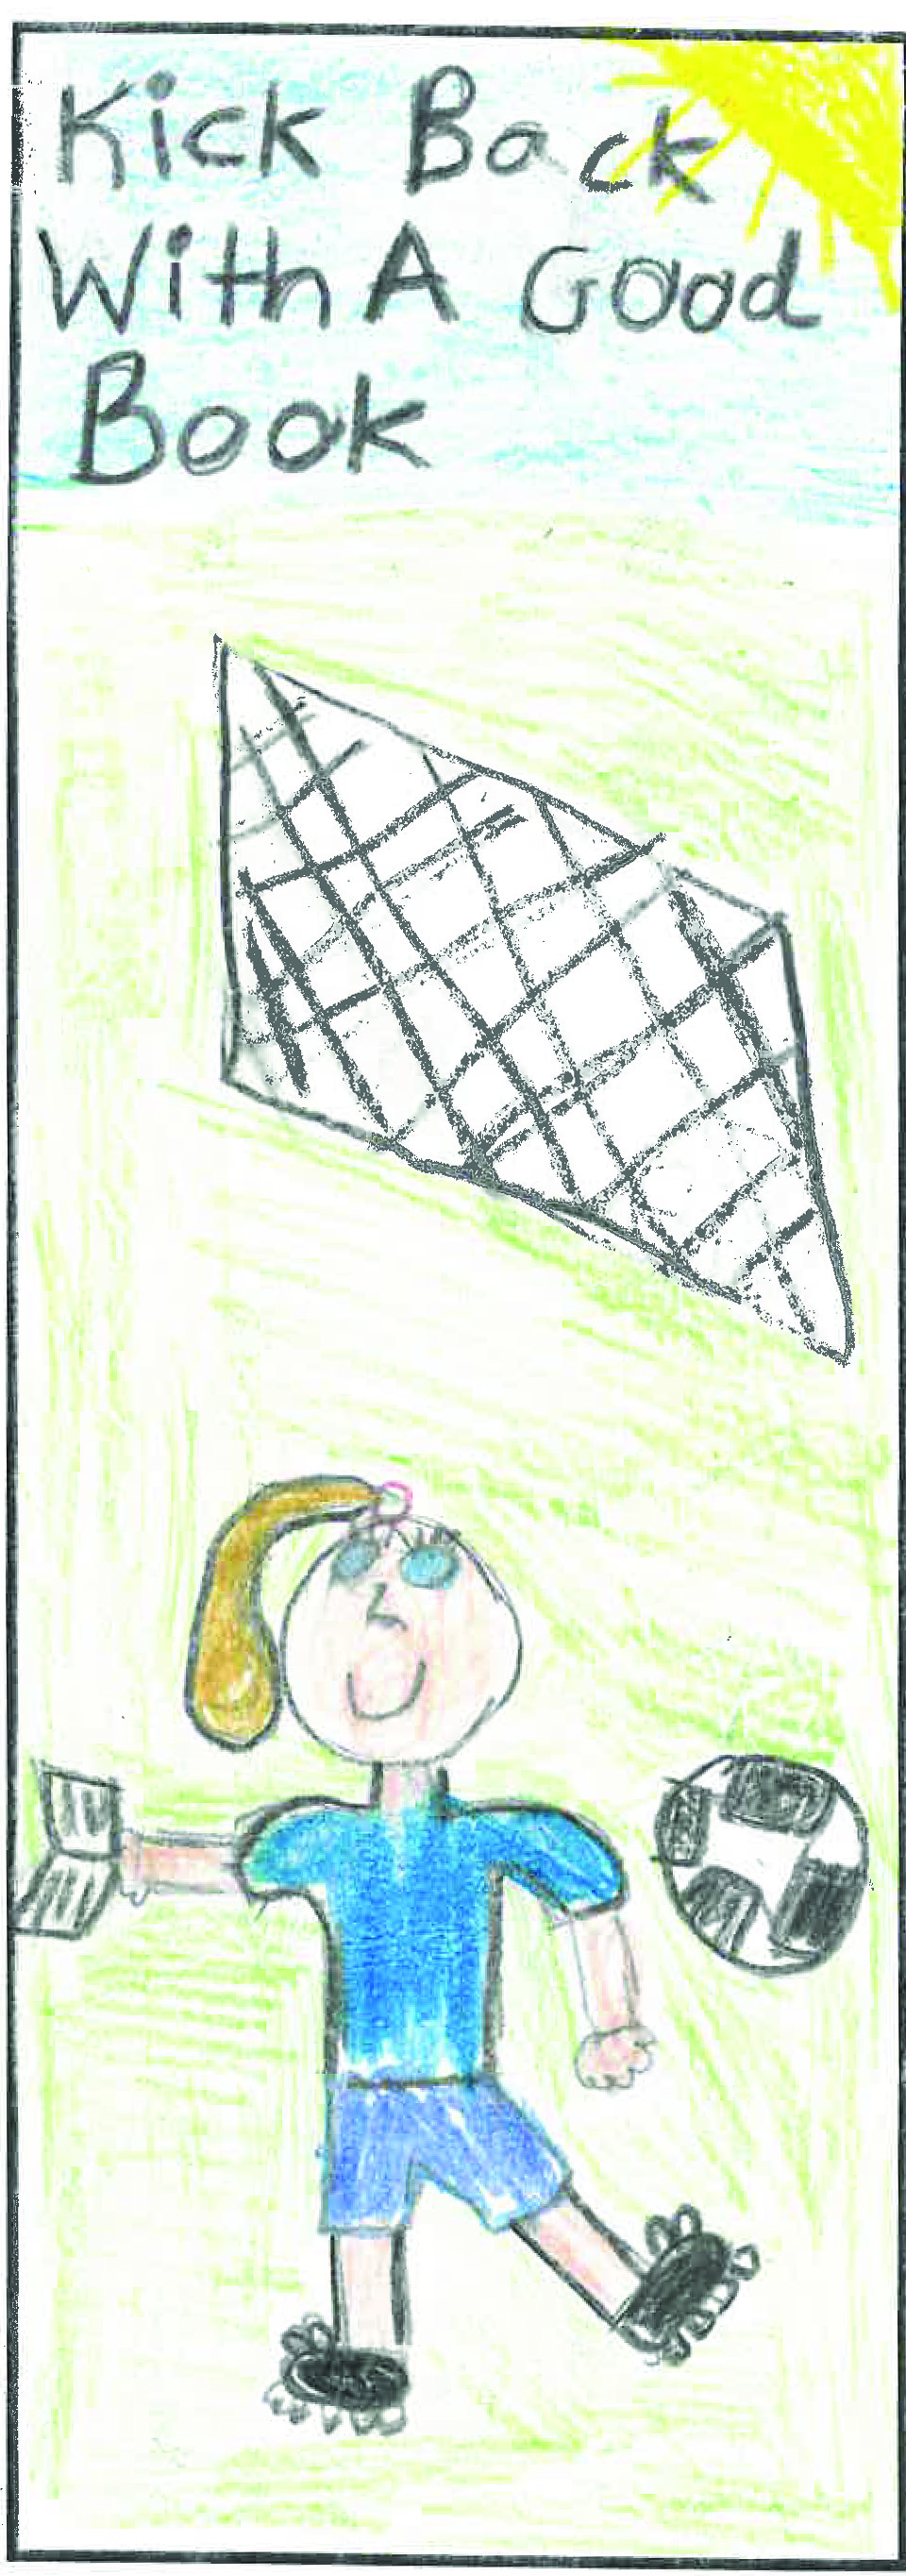 October 2020 bookmark contest winner illustration depicting a soccer player with a book in hand with the words, "Kick Back with a Good Book"